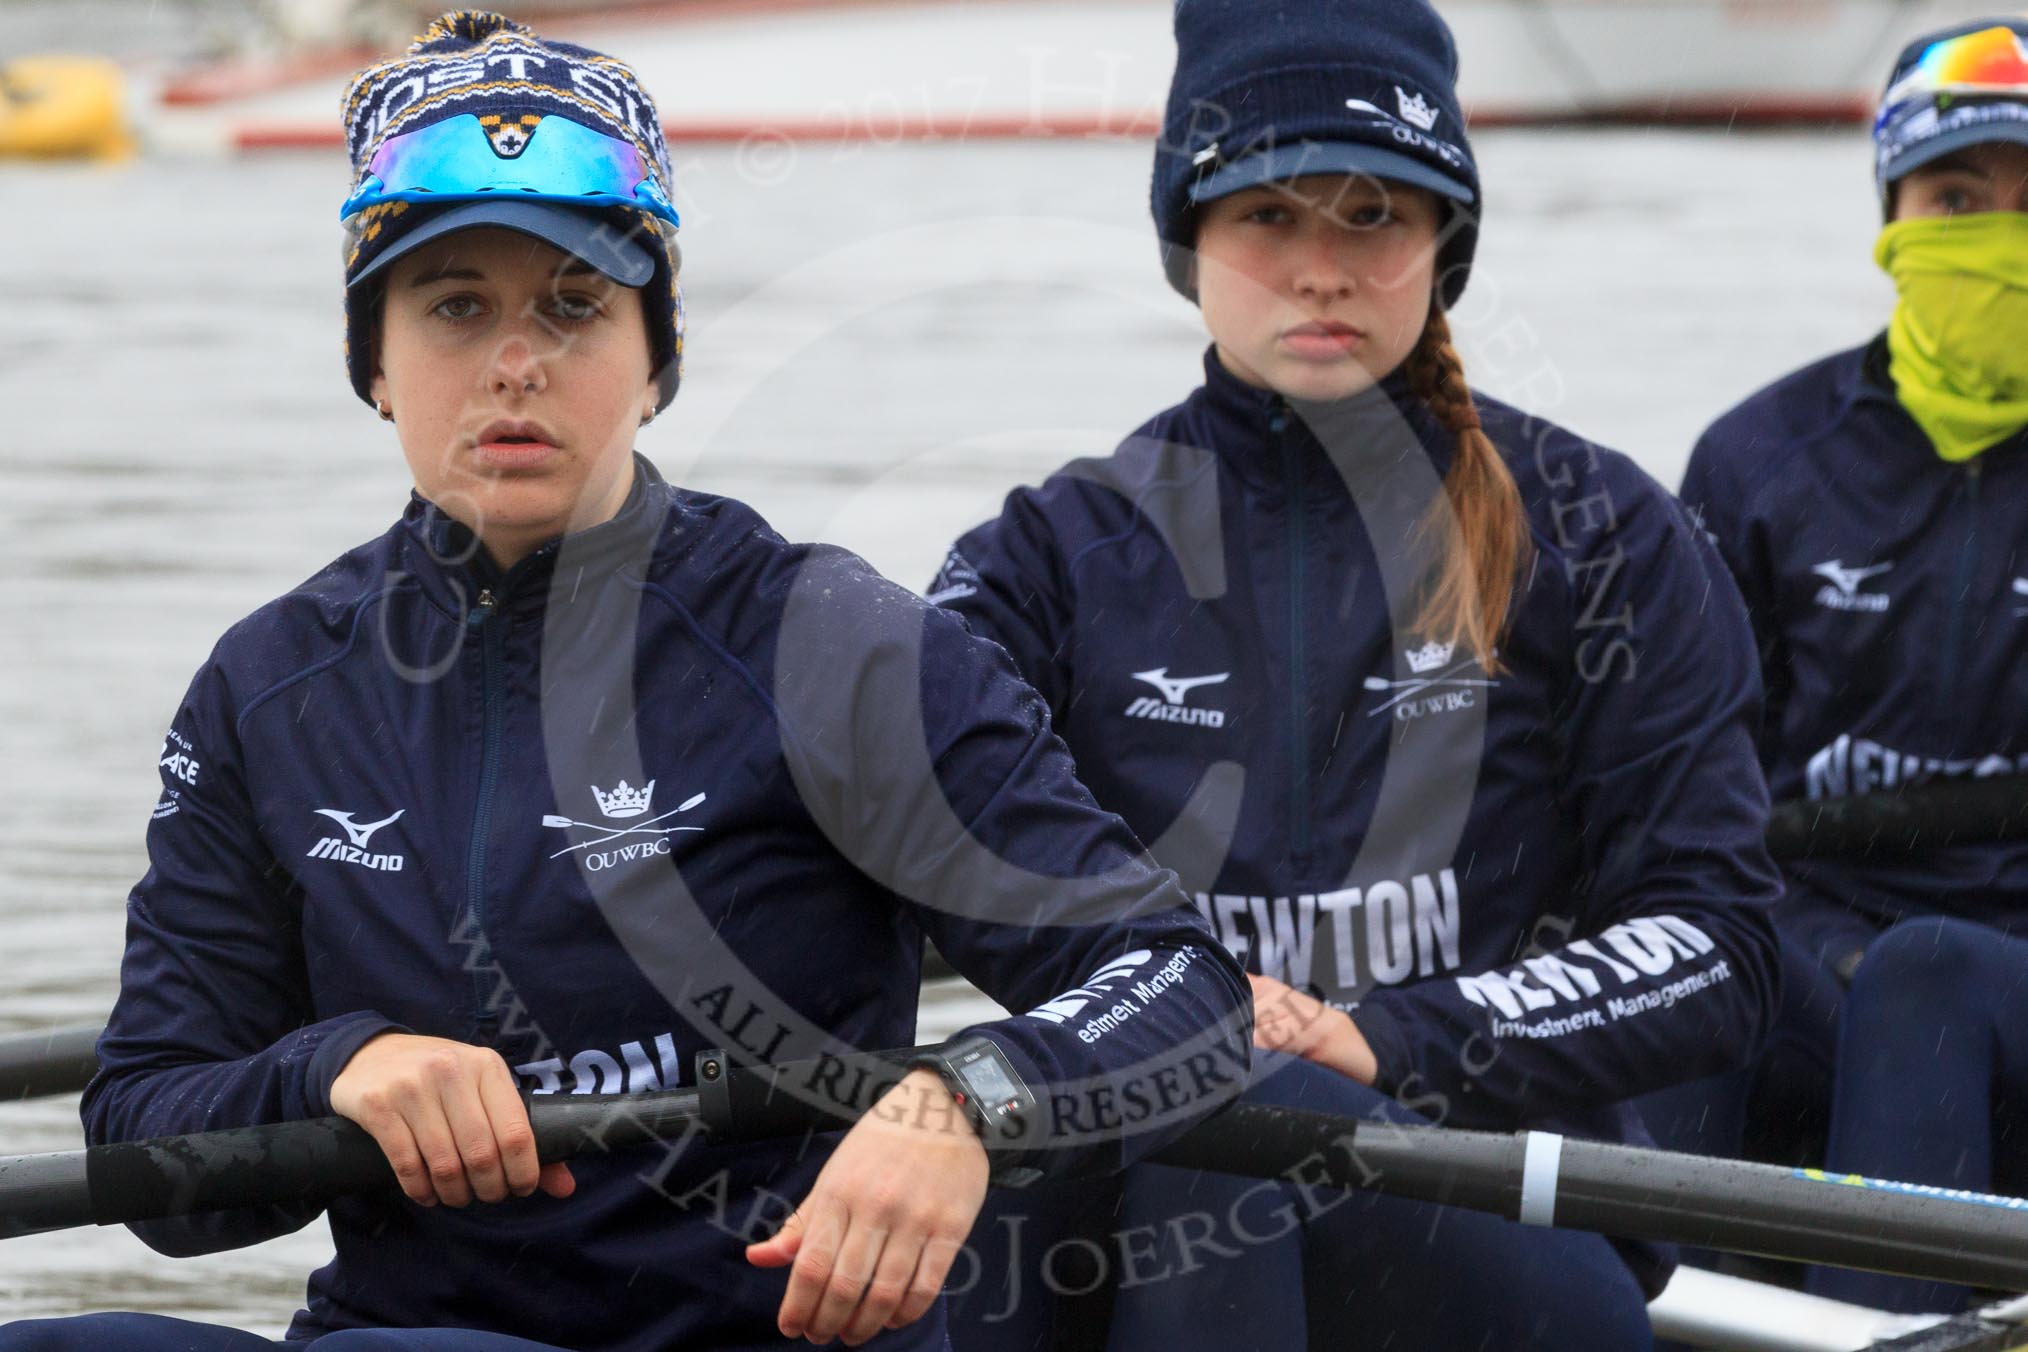 The Women's Boat Race season 2018 - fixture OUWBC vs. Molesey BC: OUWBC getting the boat ready on a cold and rainy day, here 4 seat "Ghost Ship" Alice Roberts, 3 Juliette Perry, 2 Katherine Erickson.
River Thames between Putney Bridge and Mortlake,
London SW15,

United Kingdom,
on 04 March 2018 at 13:05, image #8